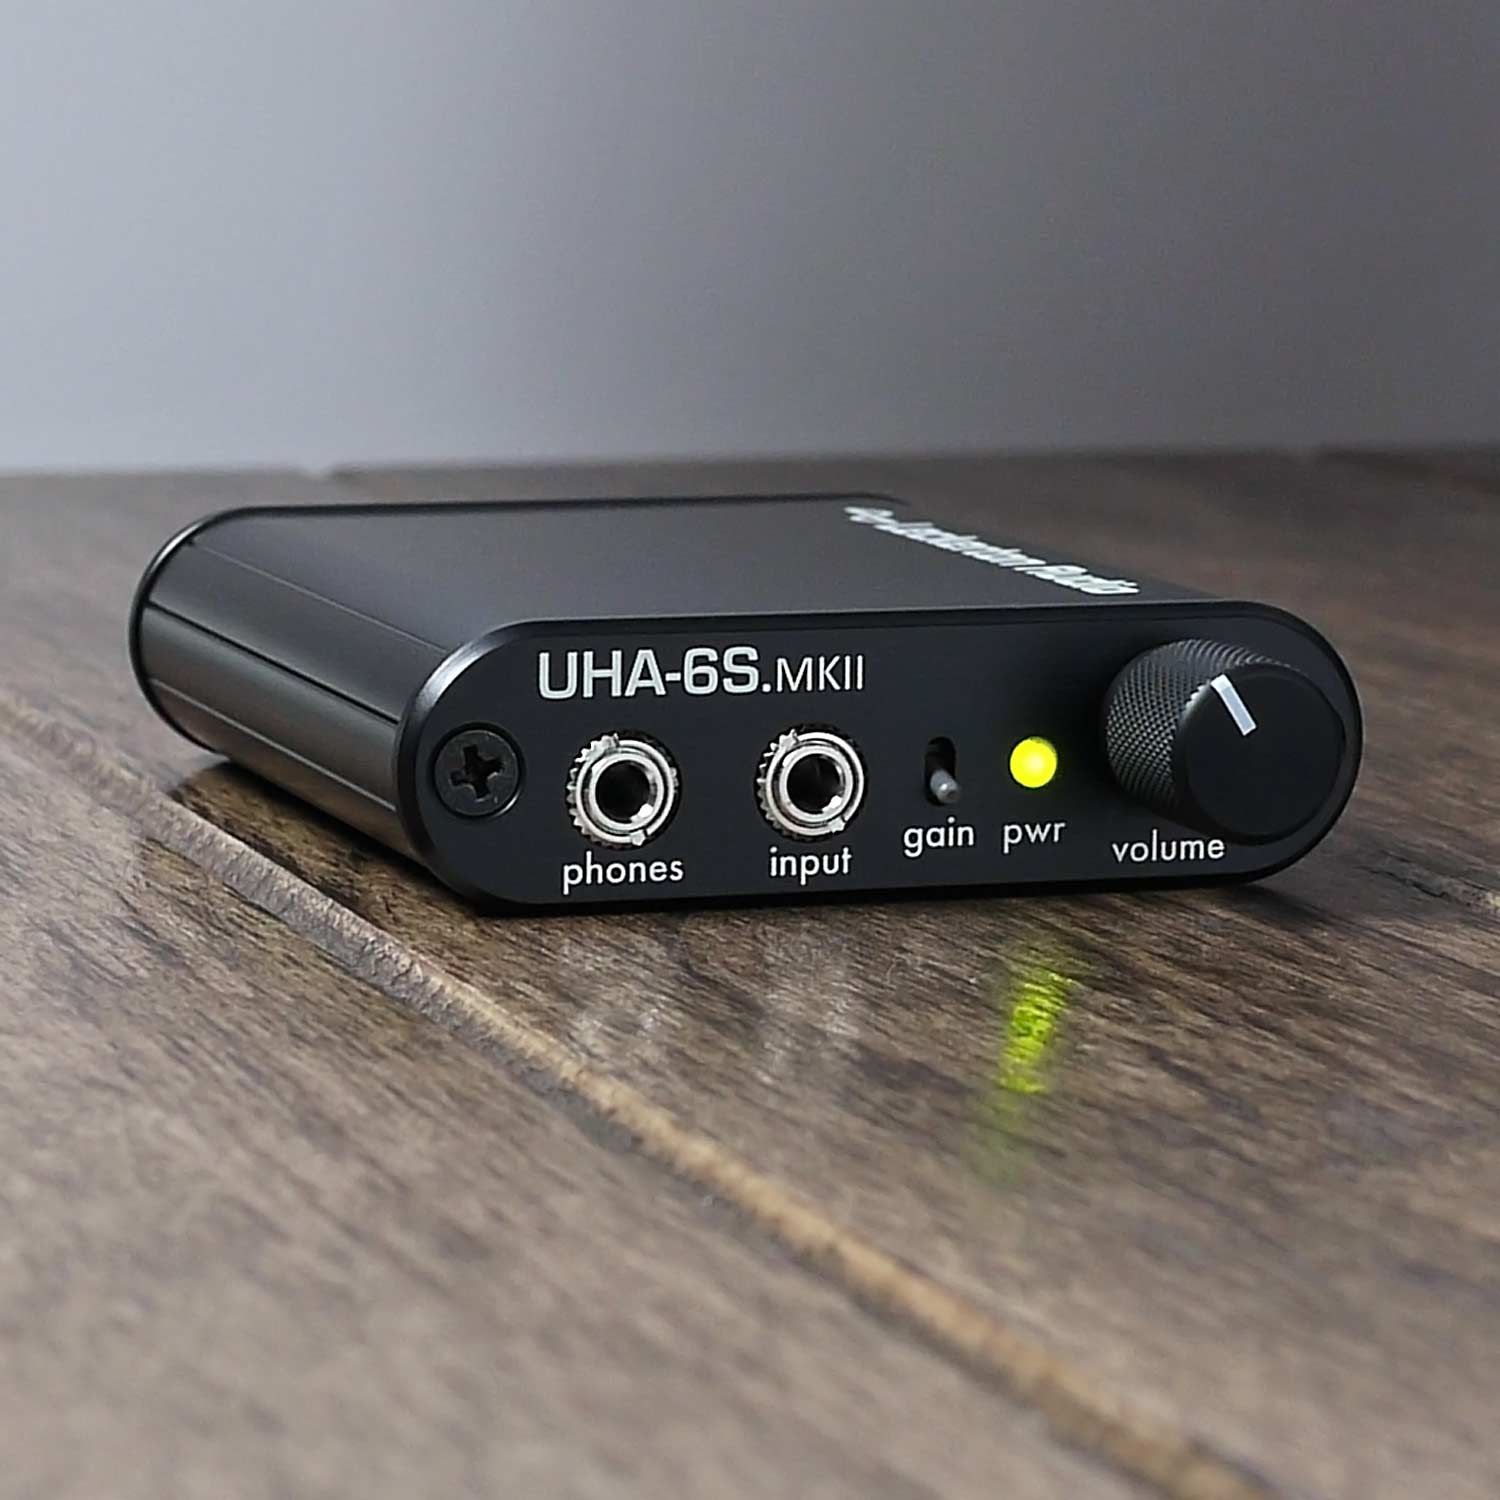 B-Stock UHA-6S.MKII USB DAC/Amp with TOSLINK Optical and Digital 